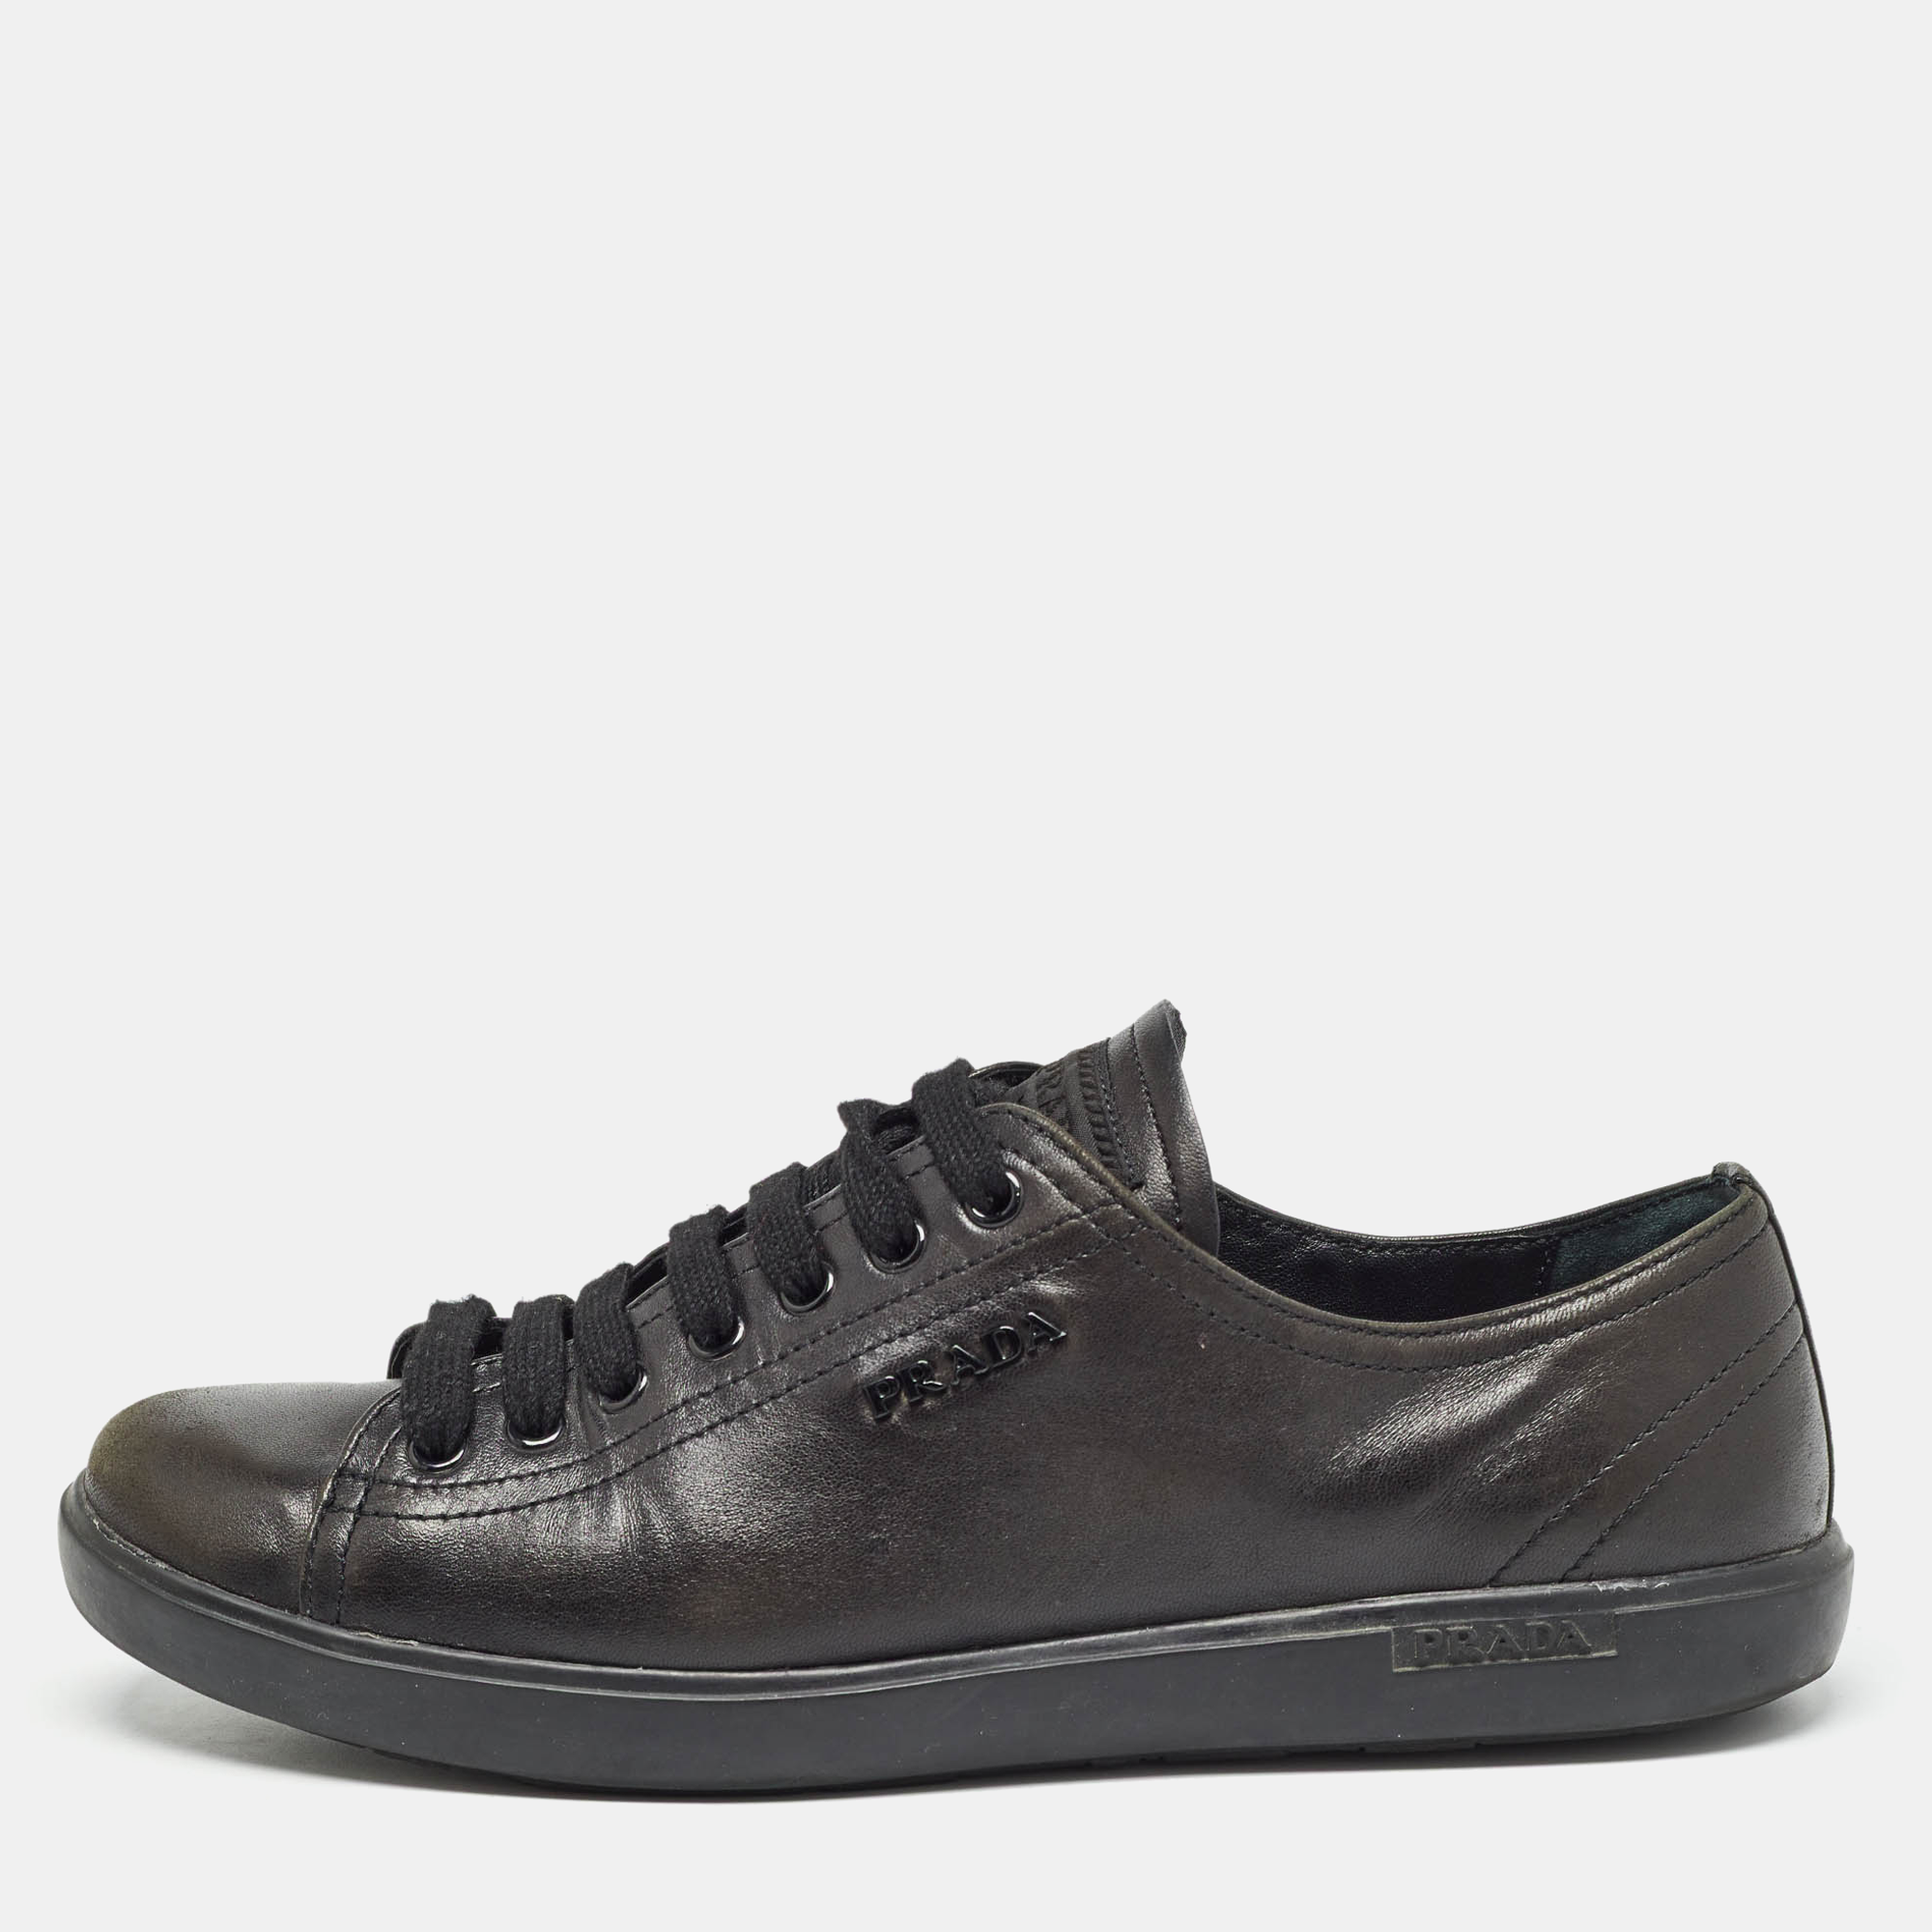 Prada black leather lace up sneakers size 38.5